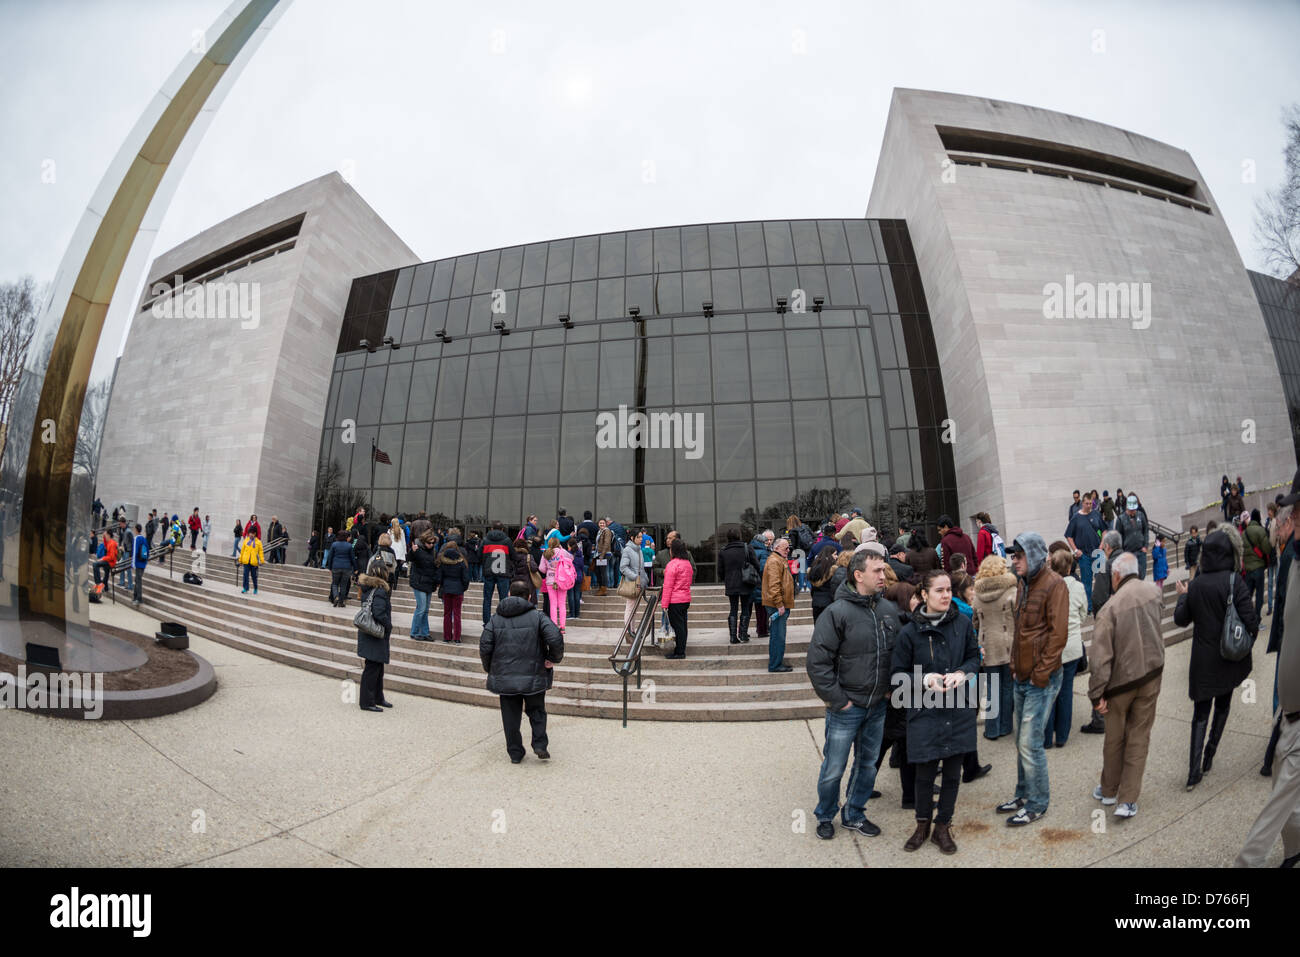 WASHINGTON DC, USA - Visitors line up to visit the Smithsonian National Air and Space Museum on the National Mall in Washington DC. The Air and Space Museum is one of the world's most-visited museums and houses planes and spacecraft from the flight and space age. Stock Photo